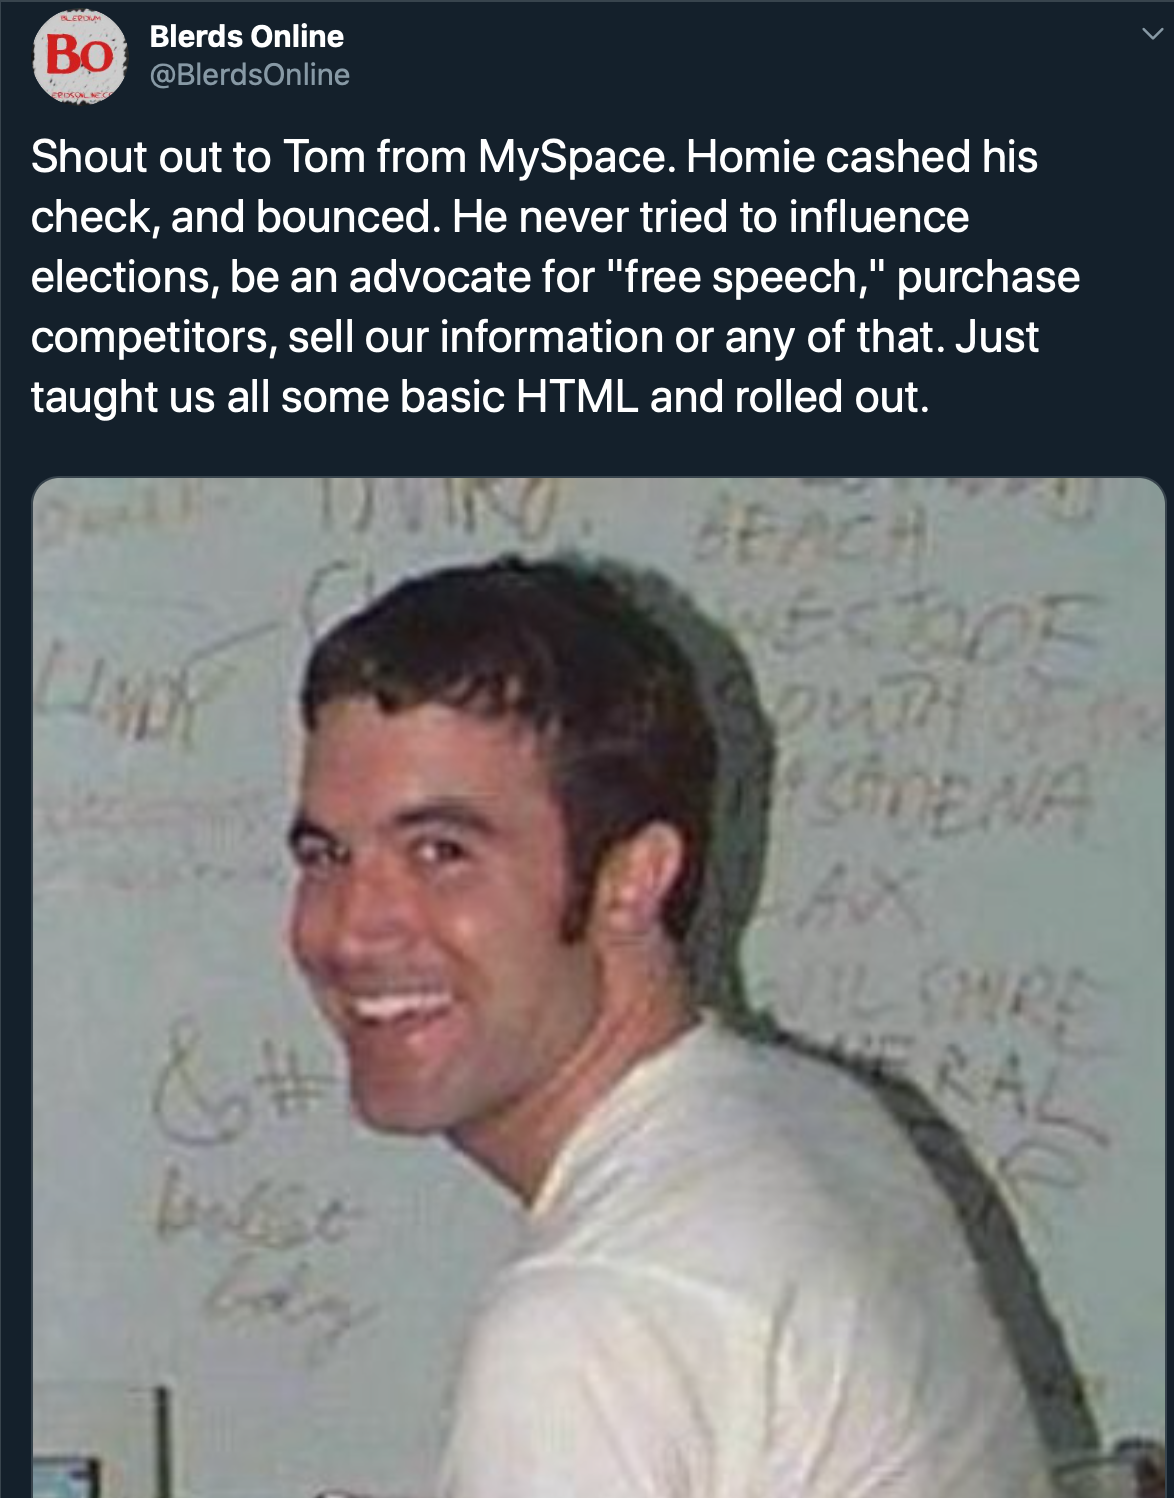 human - Blerds Online Shout out to Tom from MySpace. Homie cashed his check, and bounced. He never tried to influence elections, be an advocate for "free speech," purchase competitors, sell our information or any of that. Just taught us all some basic Htm